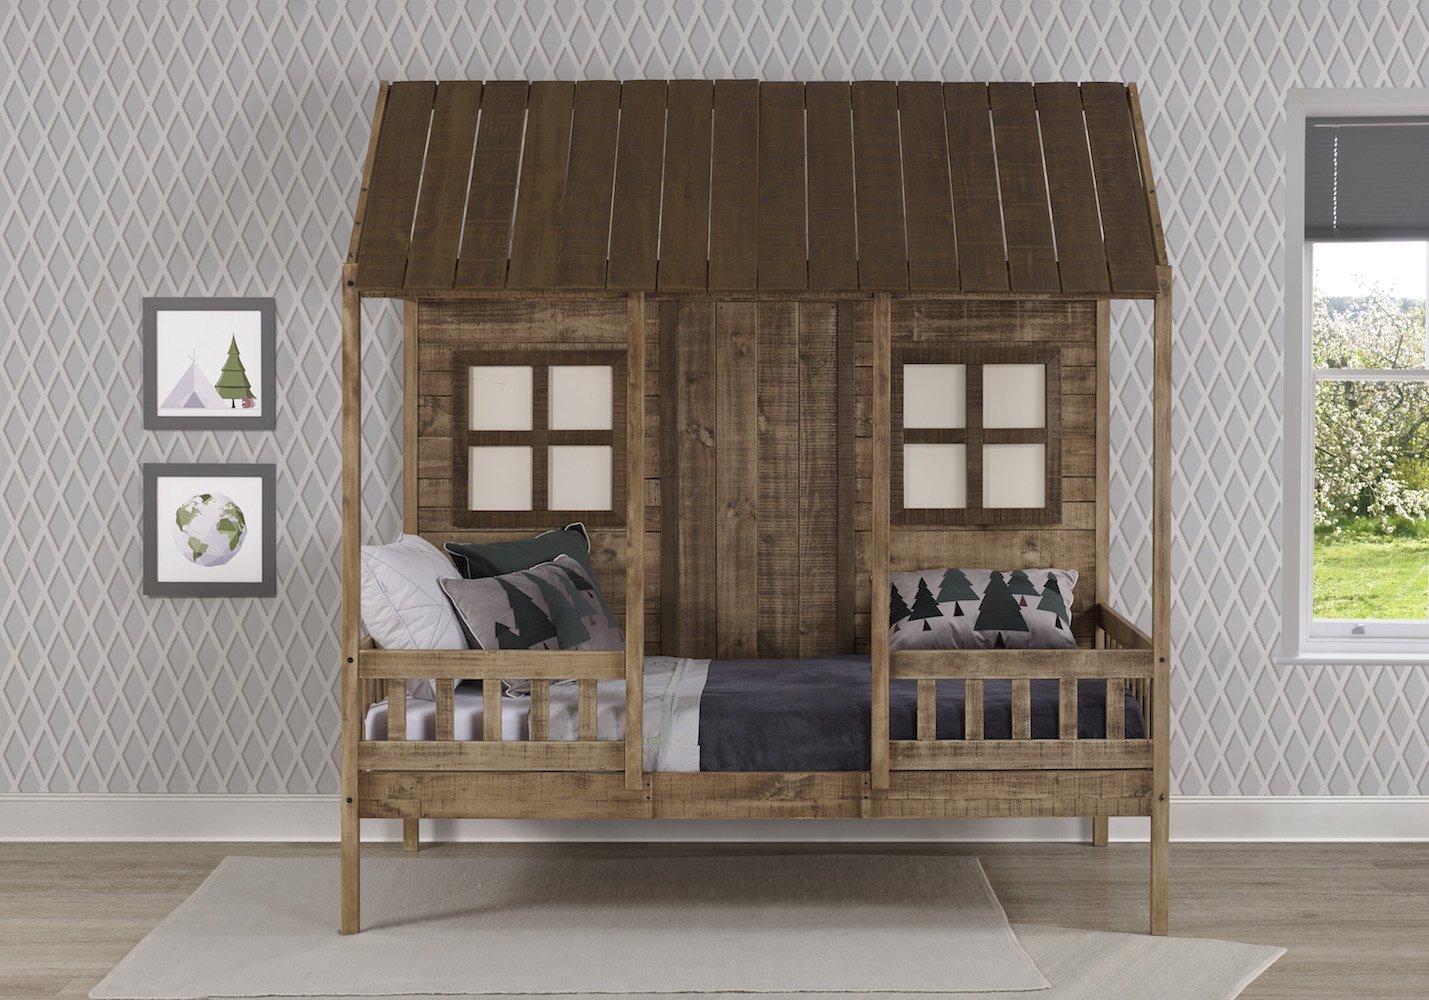 Country Roads Front Porch Loft Bed